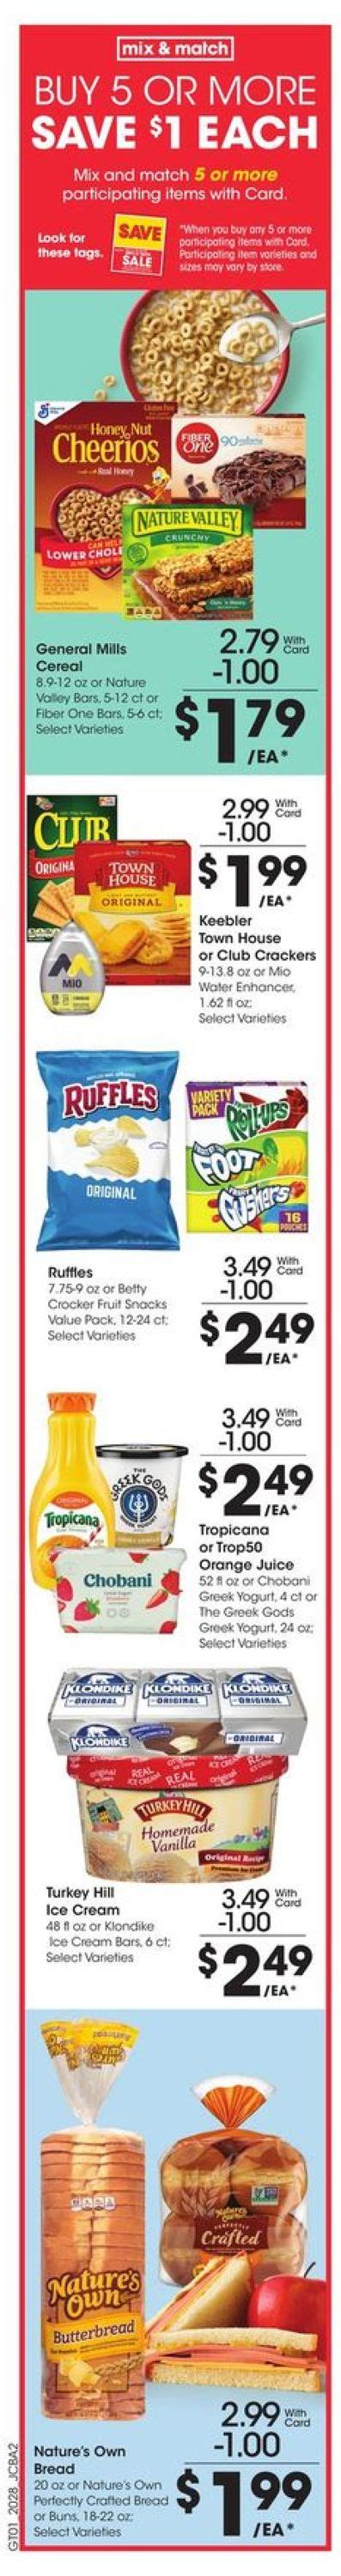 Click here for the weekly ad! Jay C Food Stores Current weekly ad 08/12 - 08/18/2020 [3 ...